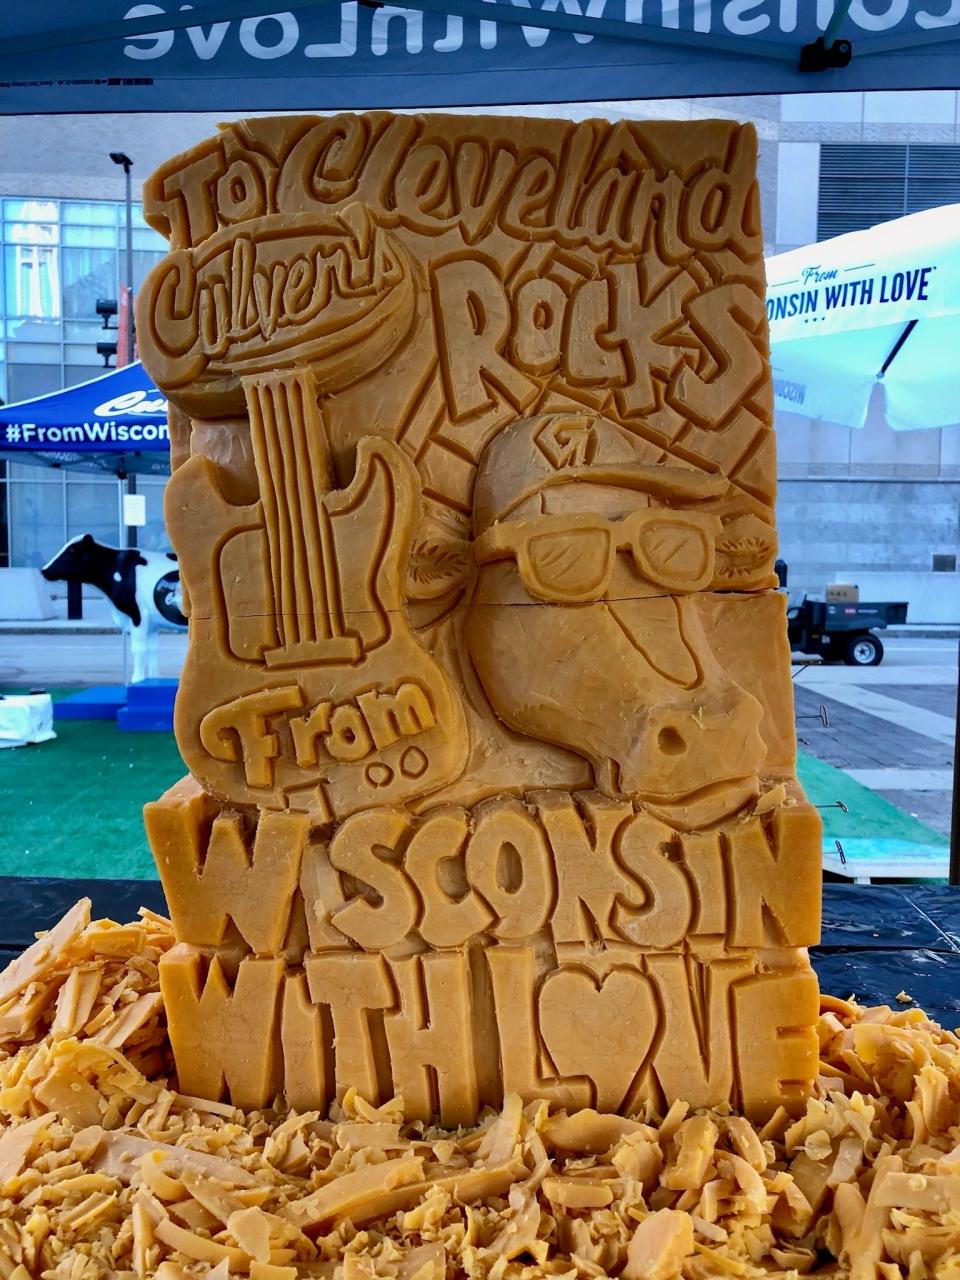 A guitar representing the Rock and Roll Hall of Fame and a Guardians baseball cap on the cow's head added local flavor to the cheese sculpture at the Culver's food truck stop in Cleveland. Sarah Kaufmann, a Manitowoc native, carved sculptures in Cleveland and other select stops of the tour.